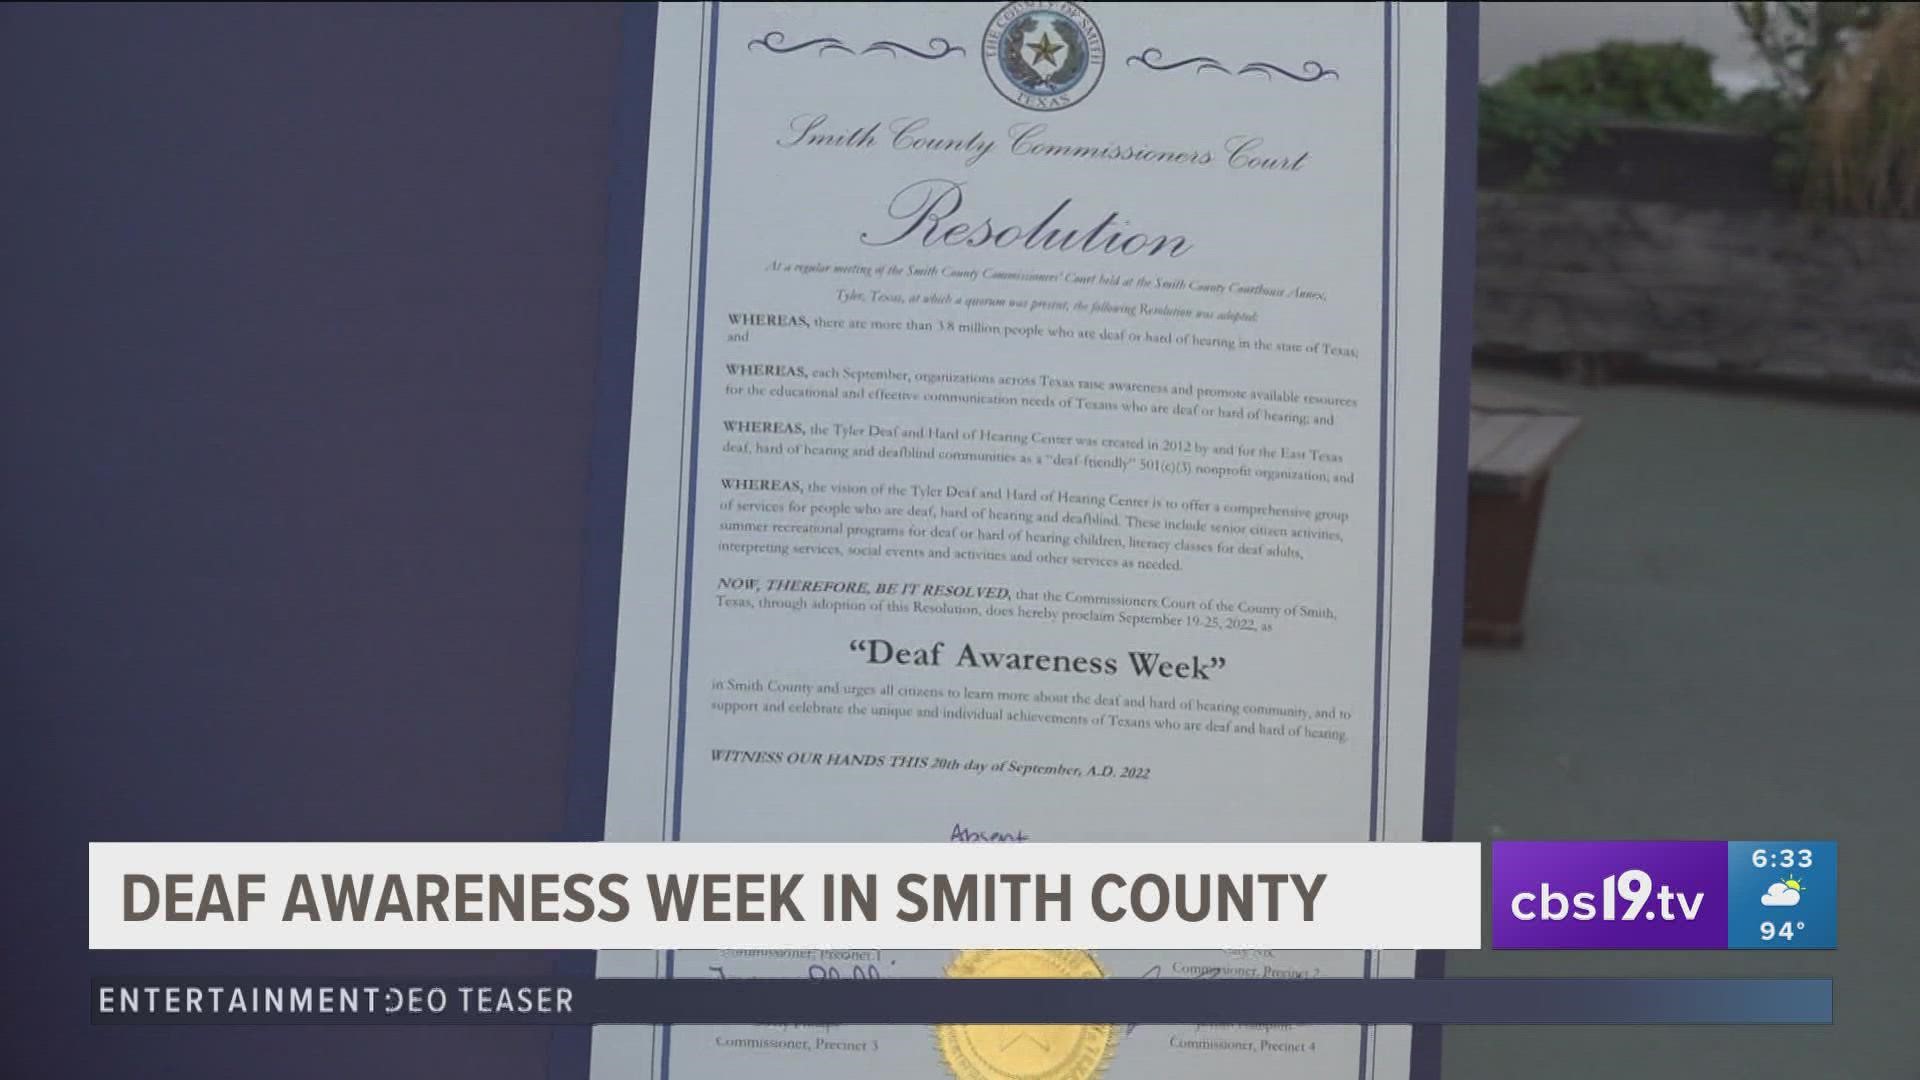 This week is Deaf Awareness Week, and the Smith County Commissioners court passed a resolution in support this morning.